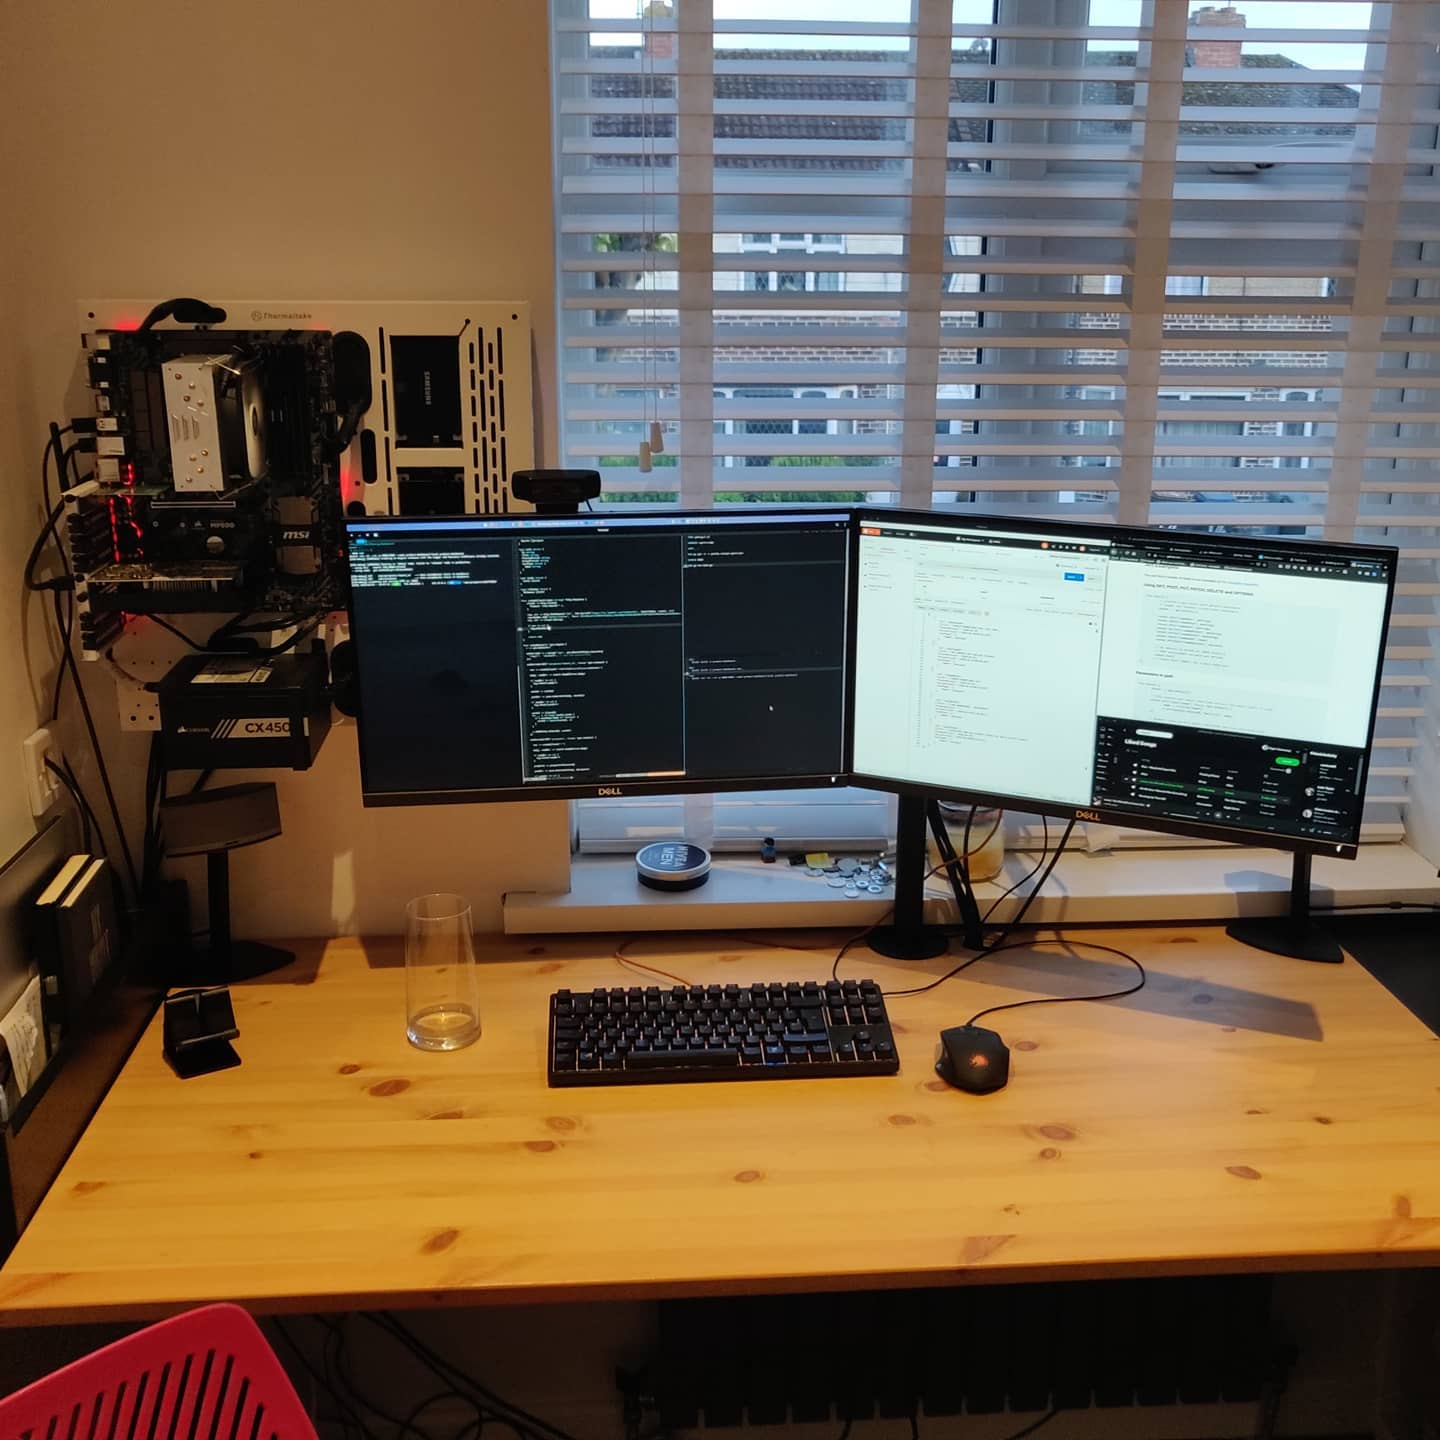 New desk in a new location